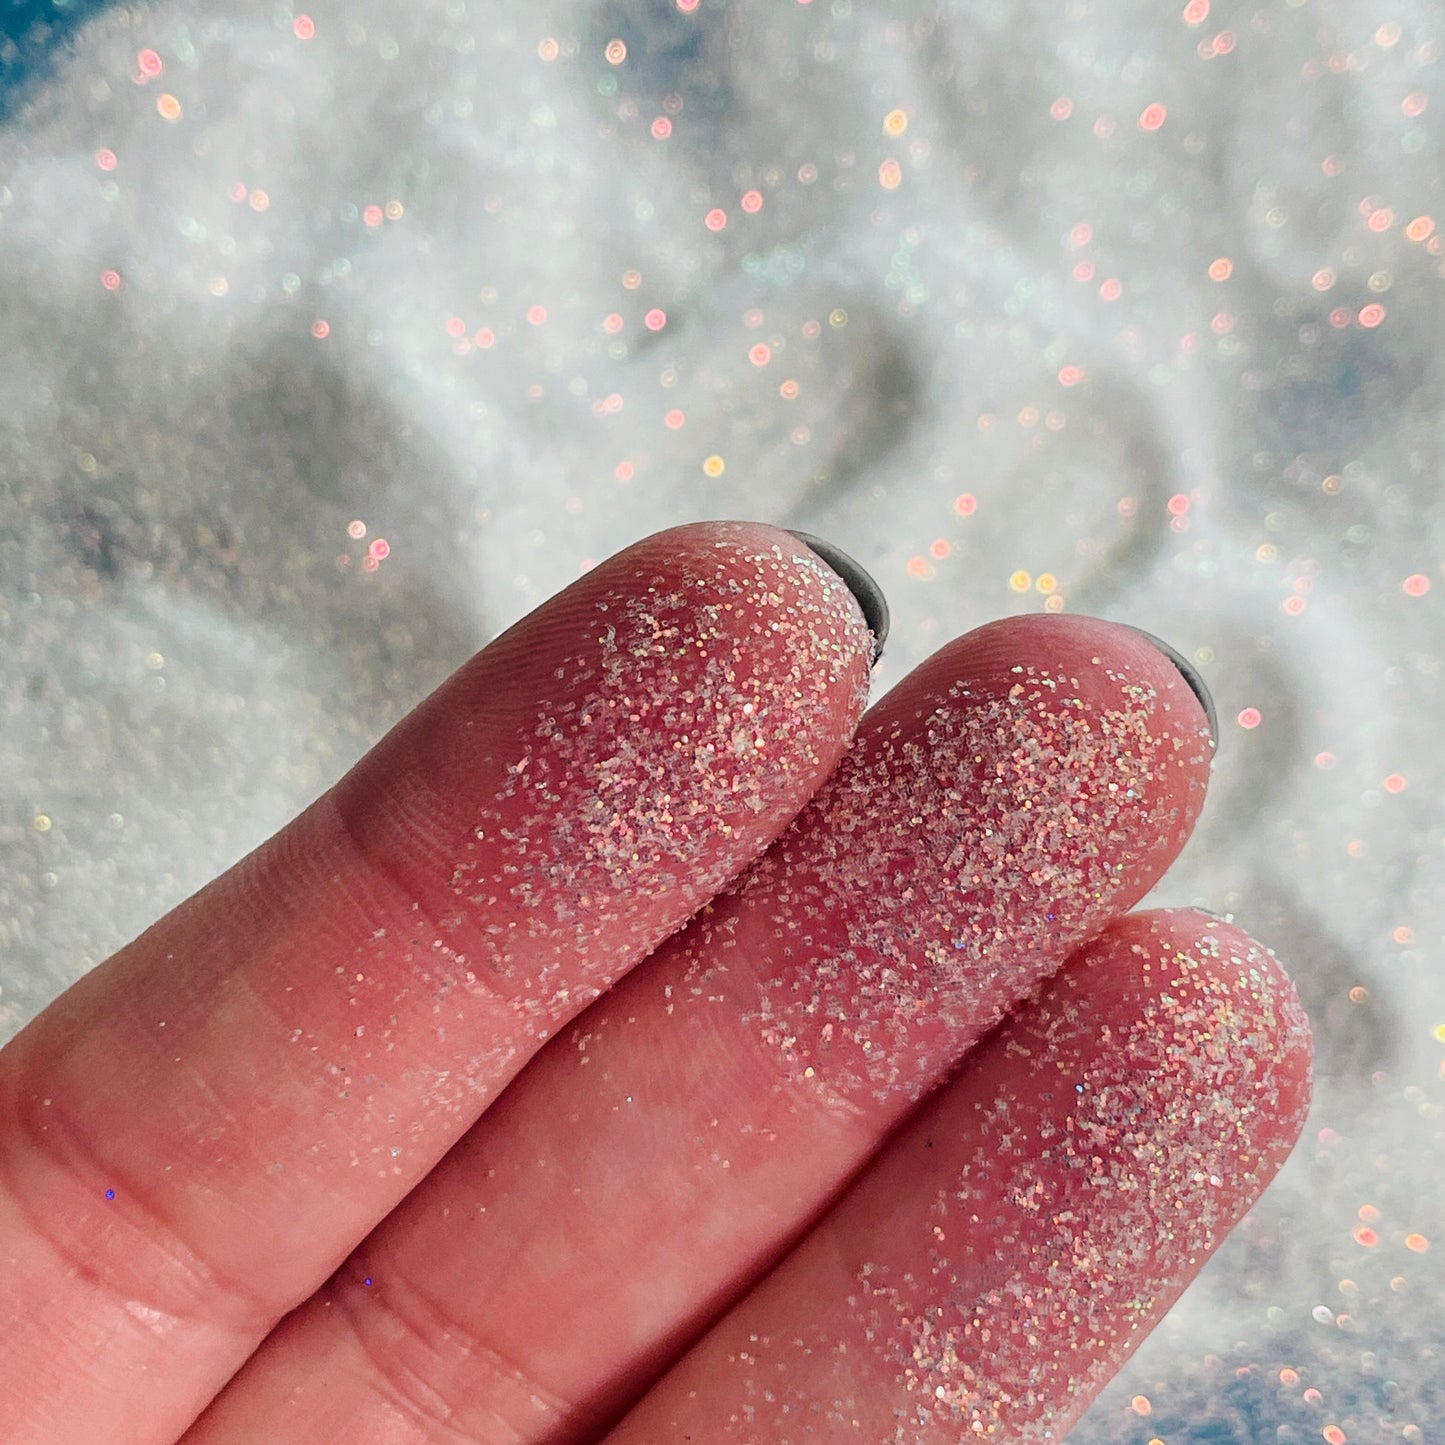 Angel Dust light pink holo Glitter for pens candles earrings clay resin mugs slime tumblers nail art 2 oz